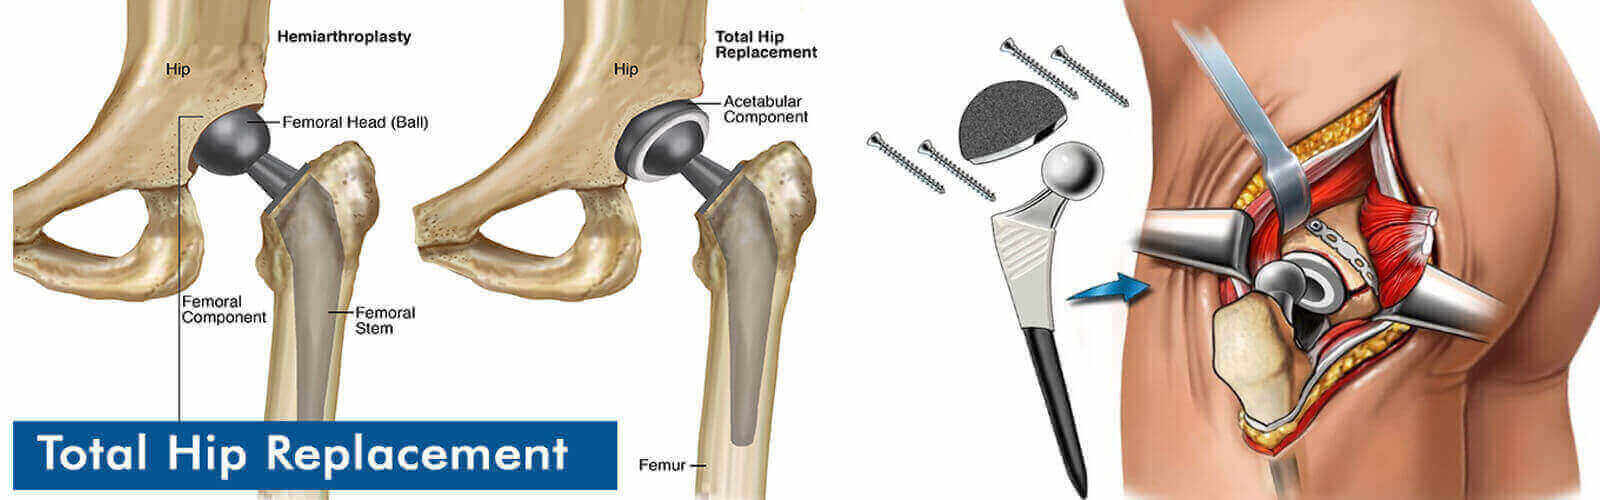 Hip Replacement Surgery Or Hip Resurfacing In Canada, Hip Replacement  Surgery Or Hip Resurfacing Hospital Canada